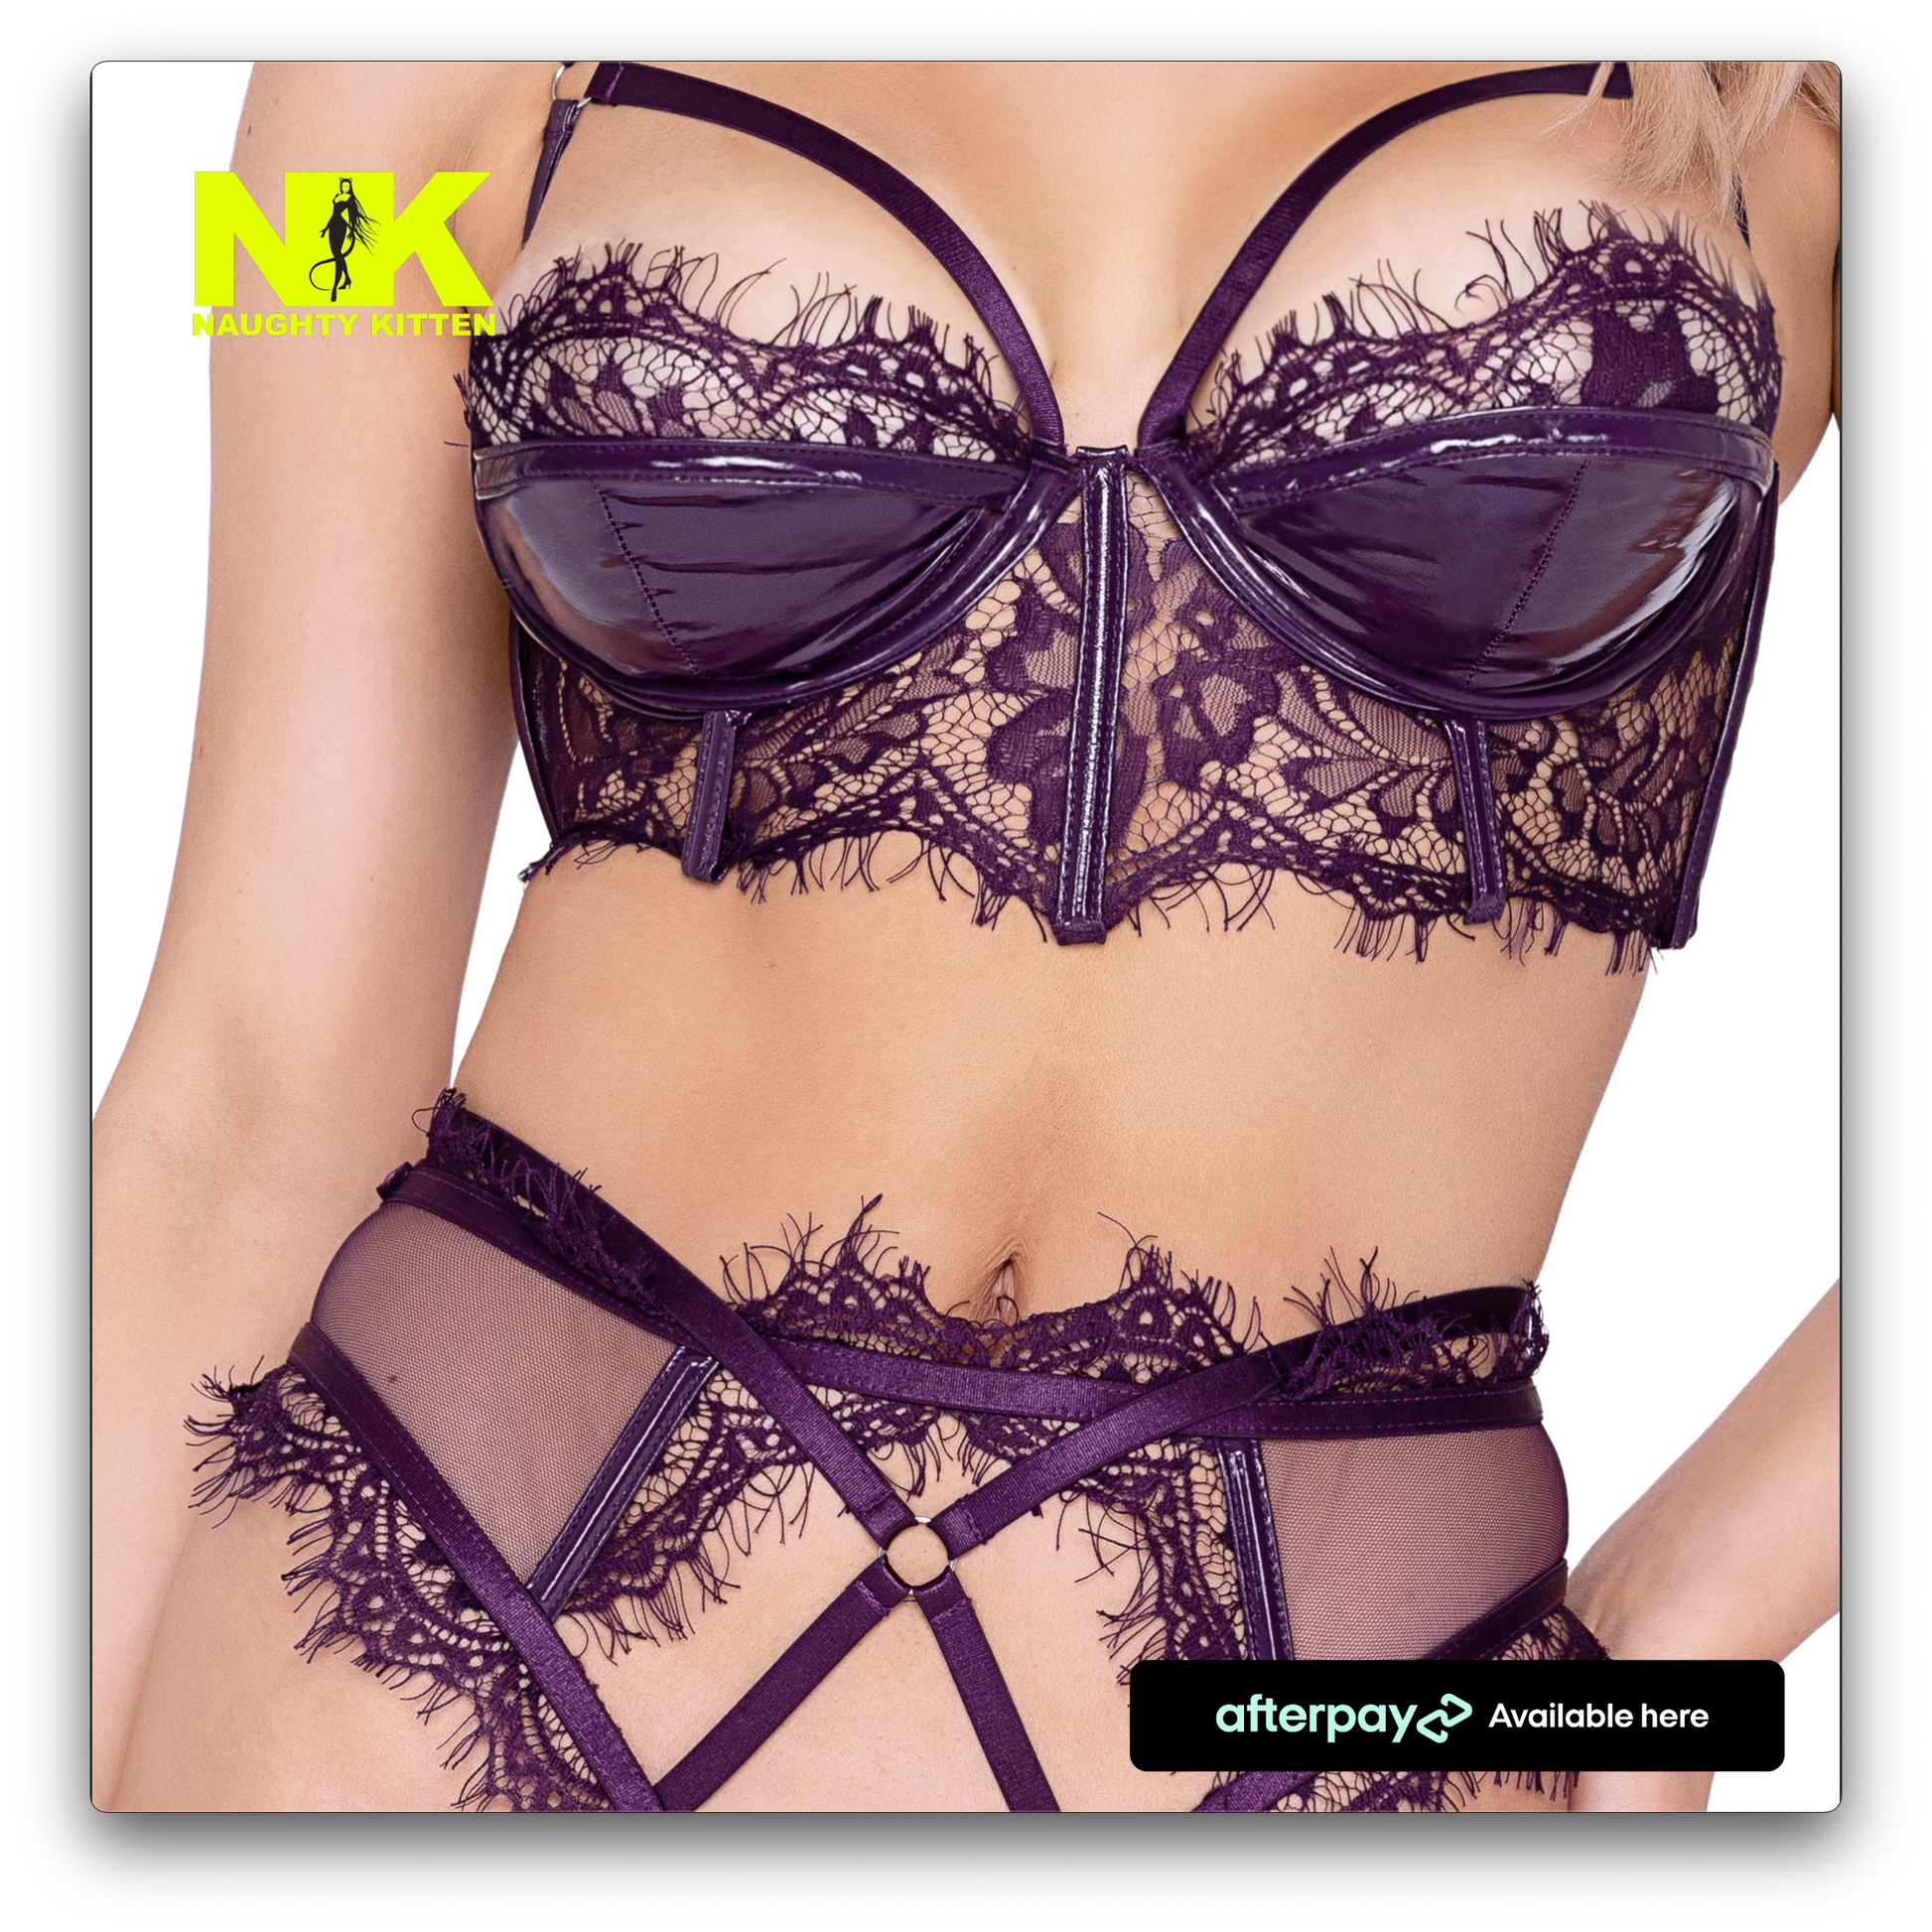 Naughty Kitten Clothing Sugar Plum 2-Piece High Waisted Set Front View Lingerie